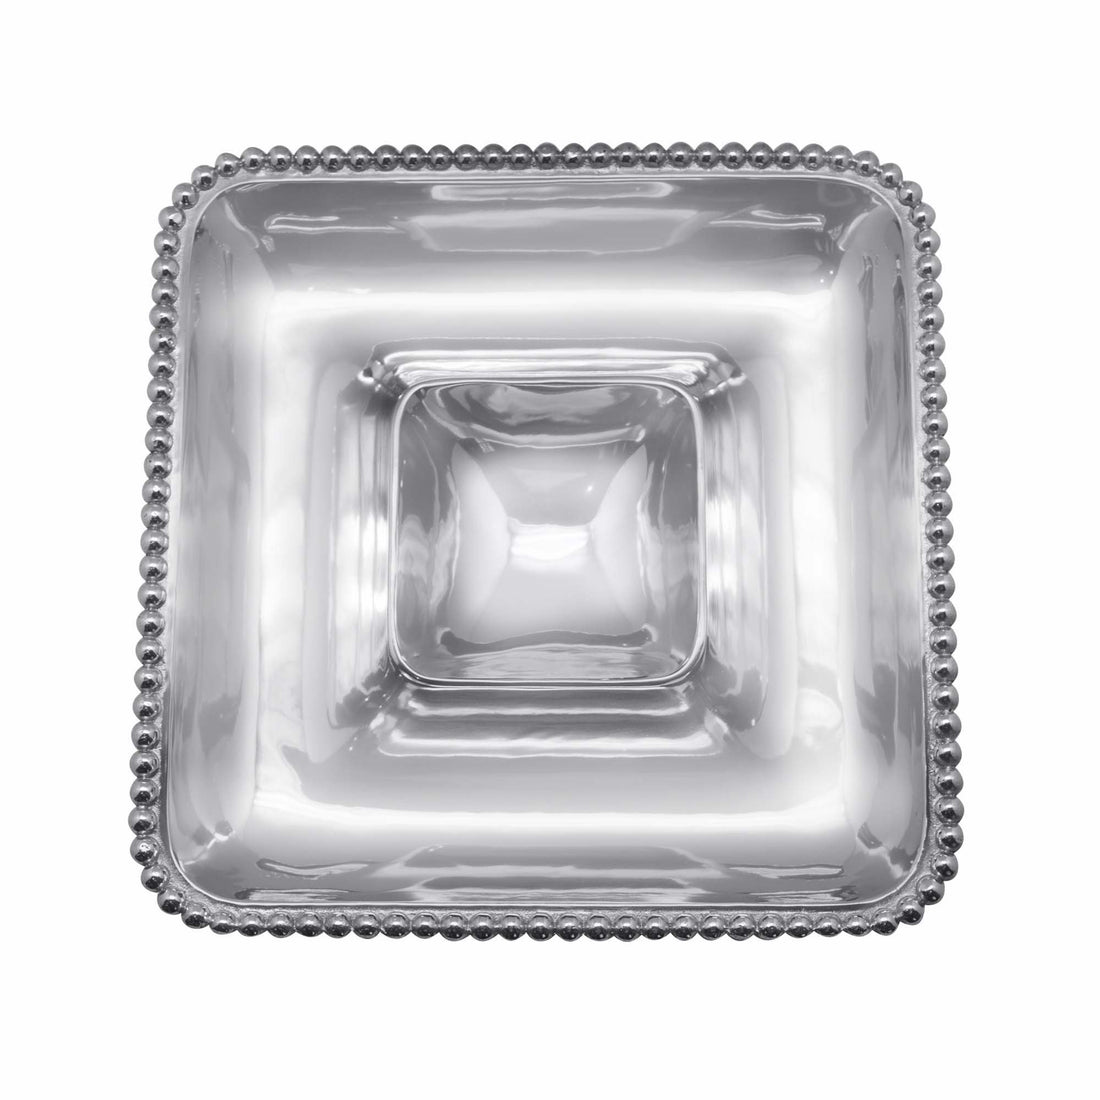 Pearled Square Chip & Dip | Mariposa Serving Trays and More